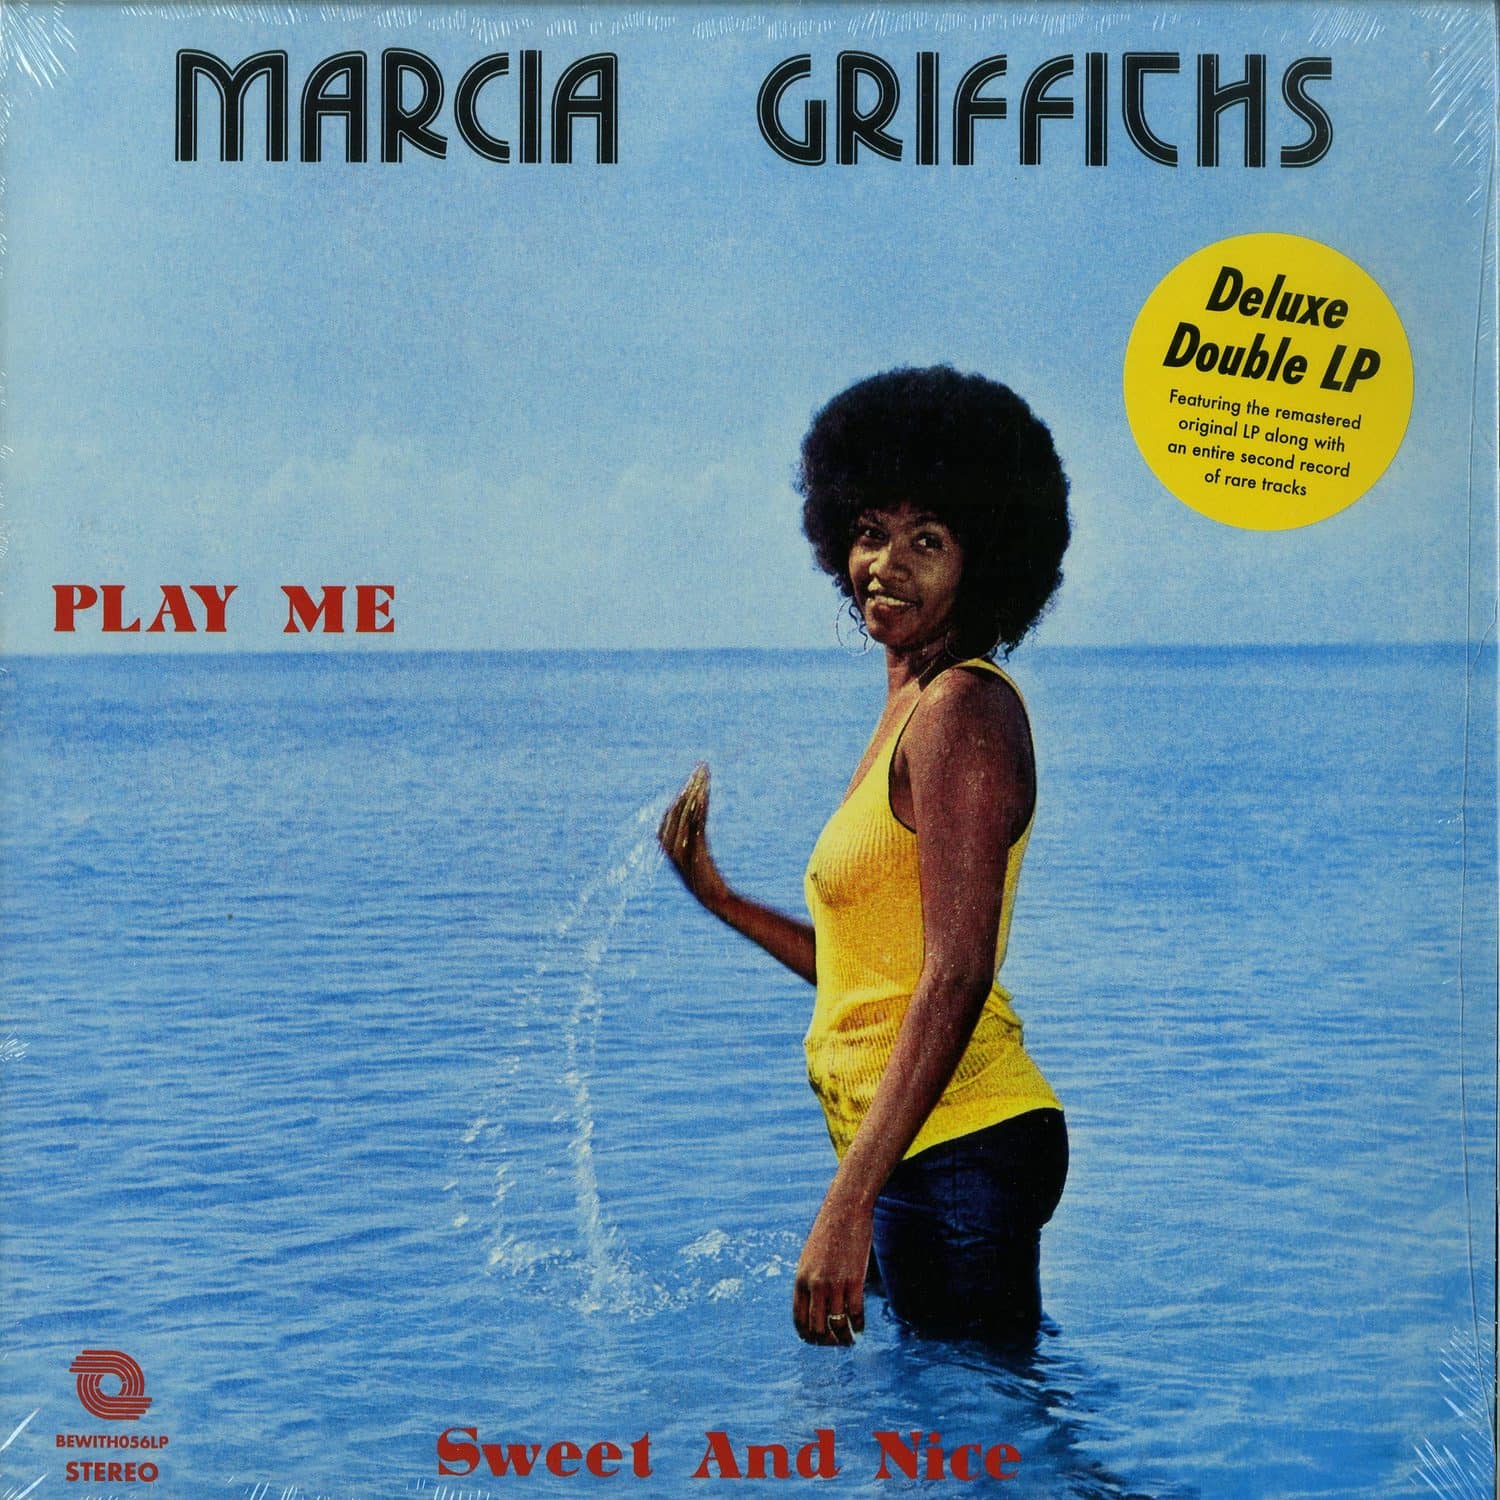 Marcia Griffiths - SWEET AND NICE 